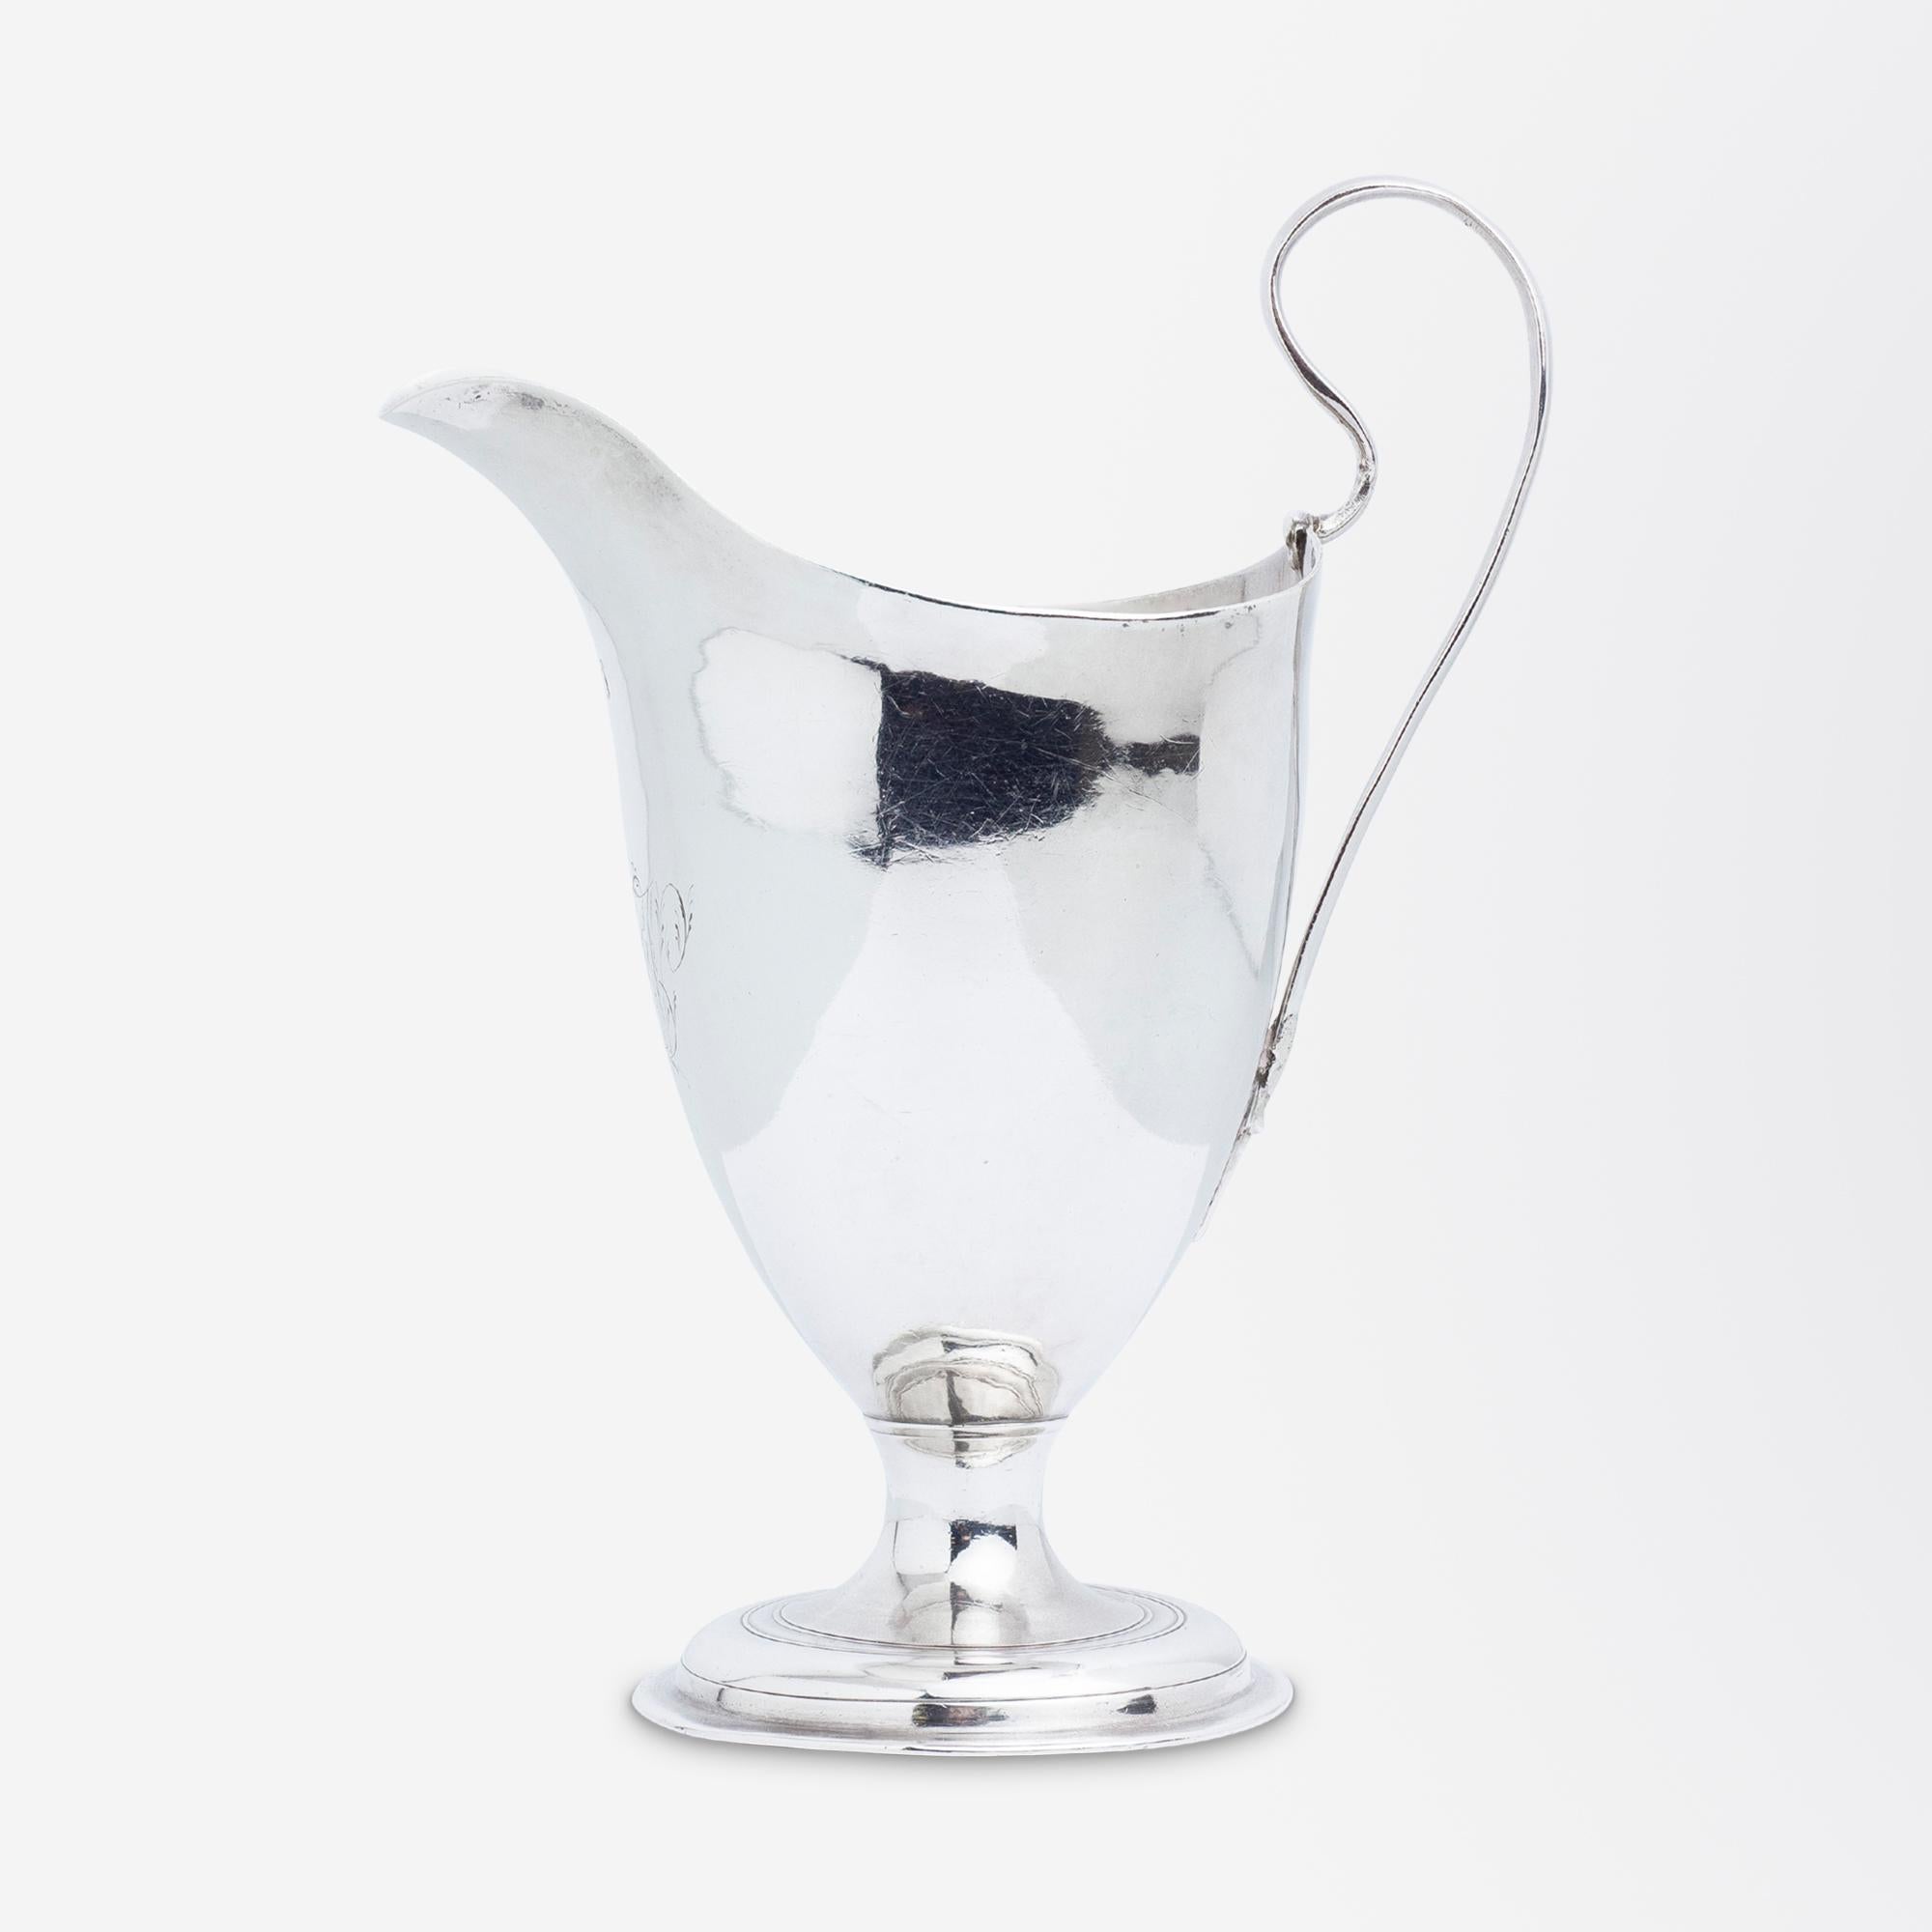 A small, George III period, sterling silver creamer by London silversmith Robert Hennel I, with period monogram. The creamer features an intricate monogram under the lip which is likely an entwined 'AW' and is most probably from the date of